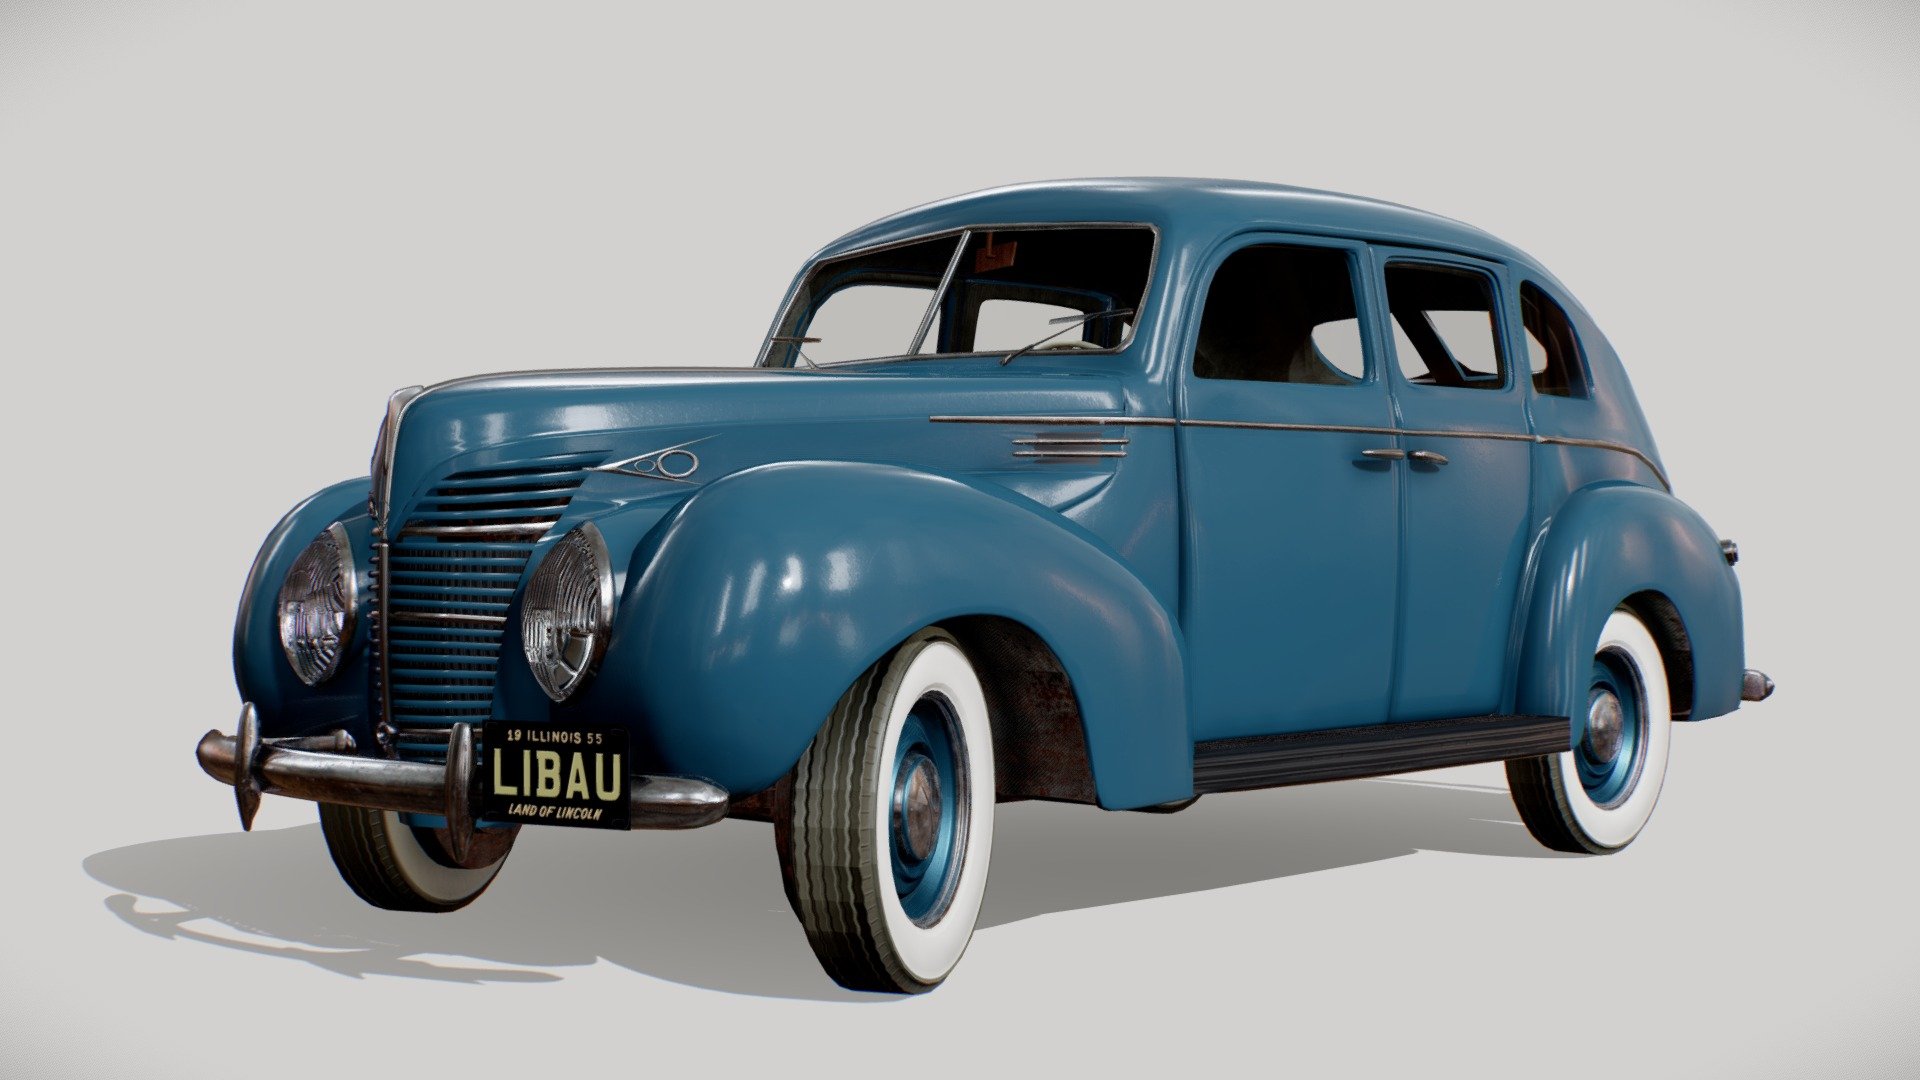 Ford-Vairogs was a Latvian car manufacturing plant, created as a partnership between the vehicle builder Vairogs and Ford Copenhagen, creating Ford’s Latvia branch. They made vehicles in the 1930s and closed down in 1940 when the second World War reached Latvia.

This new updated version is a re-work of my older model 3d model